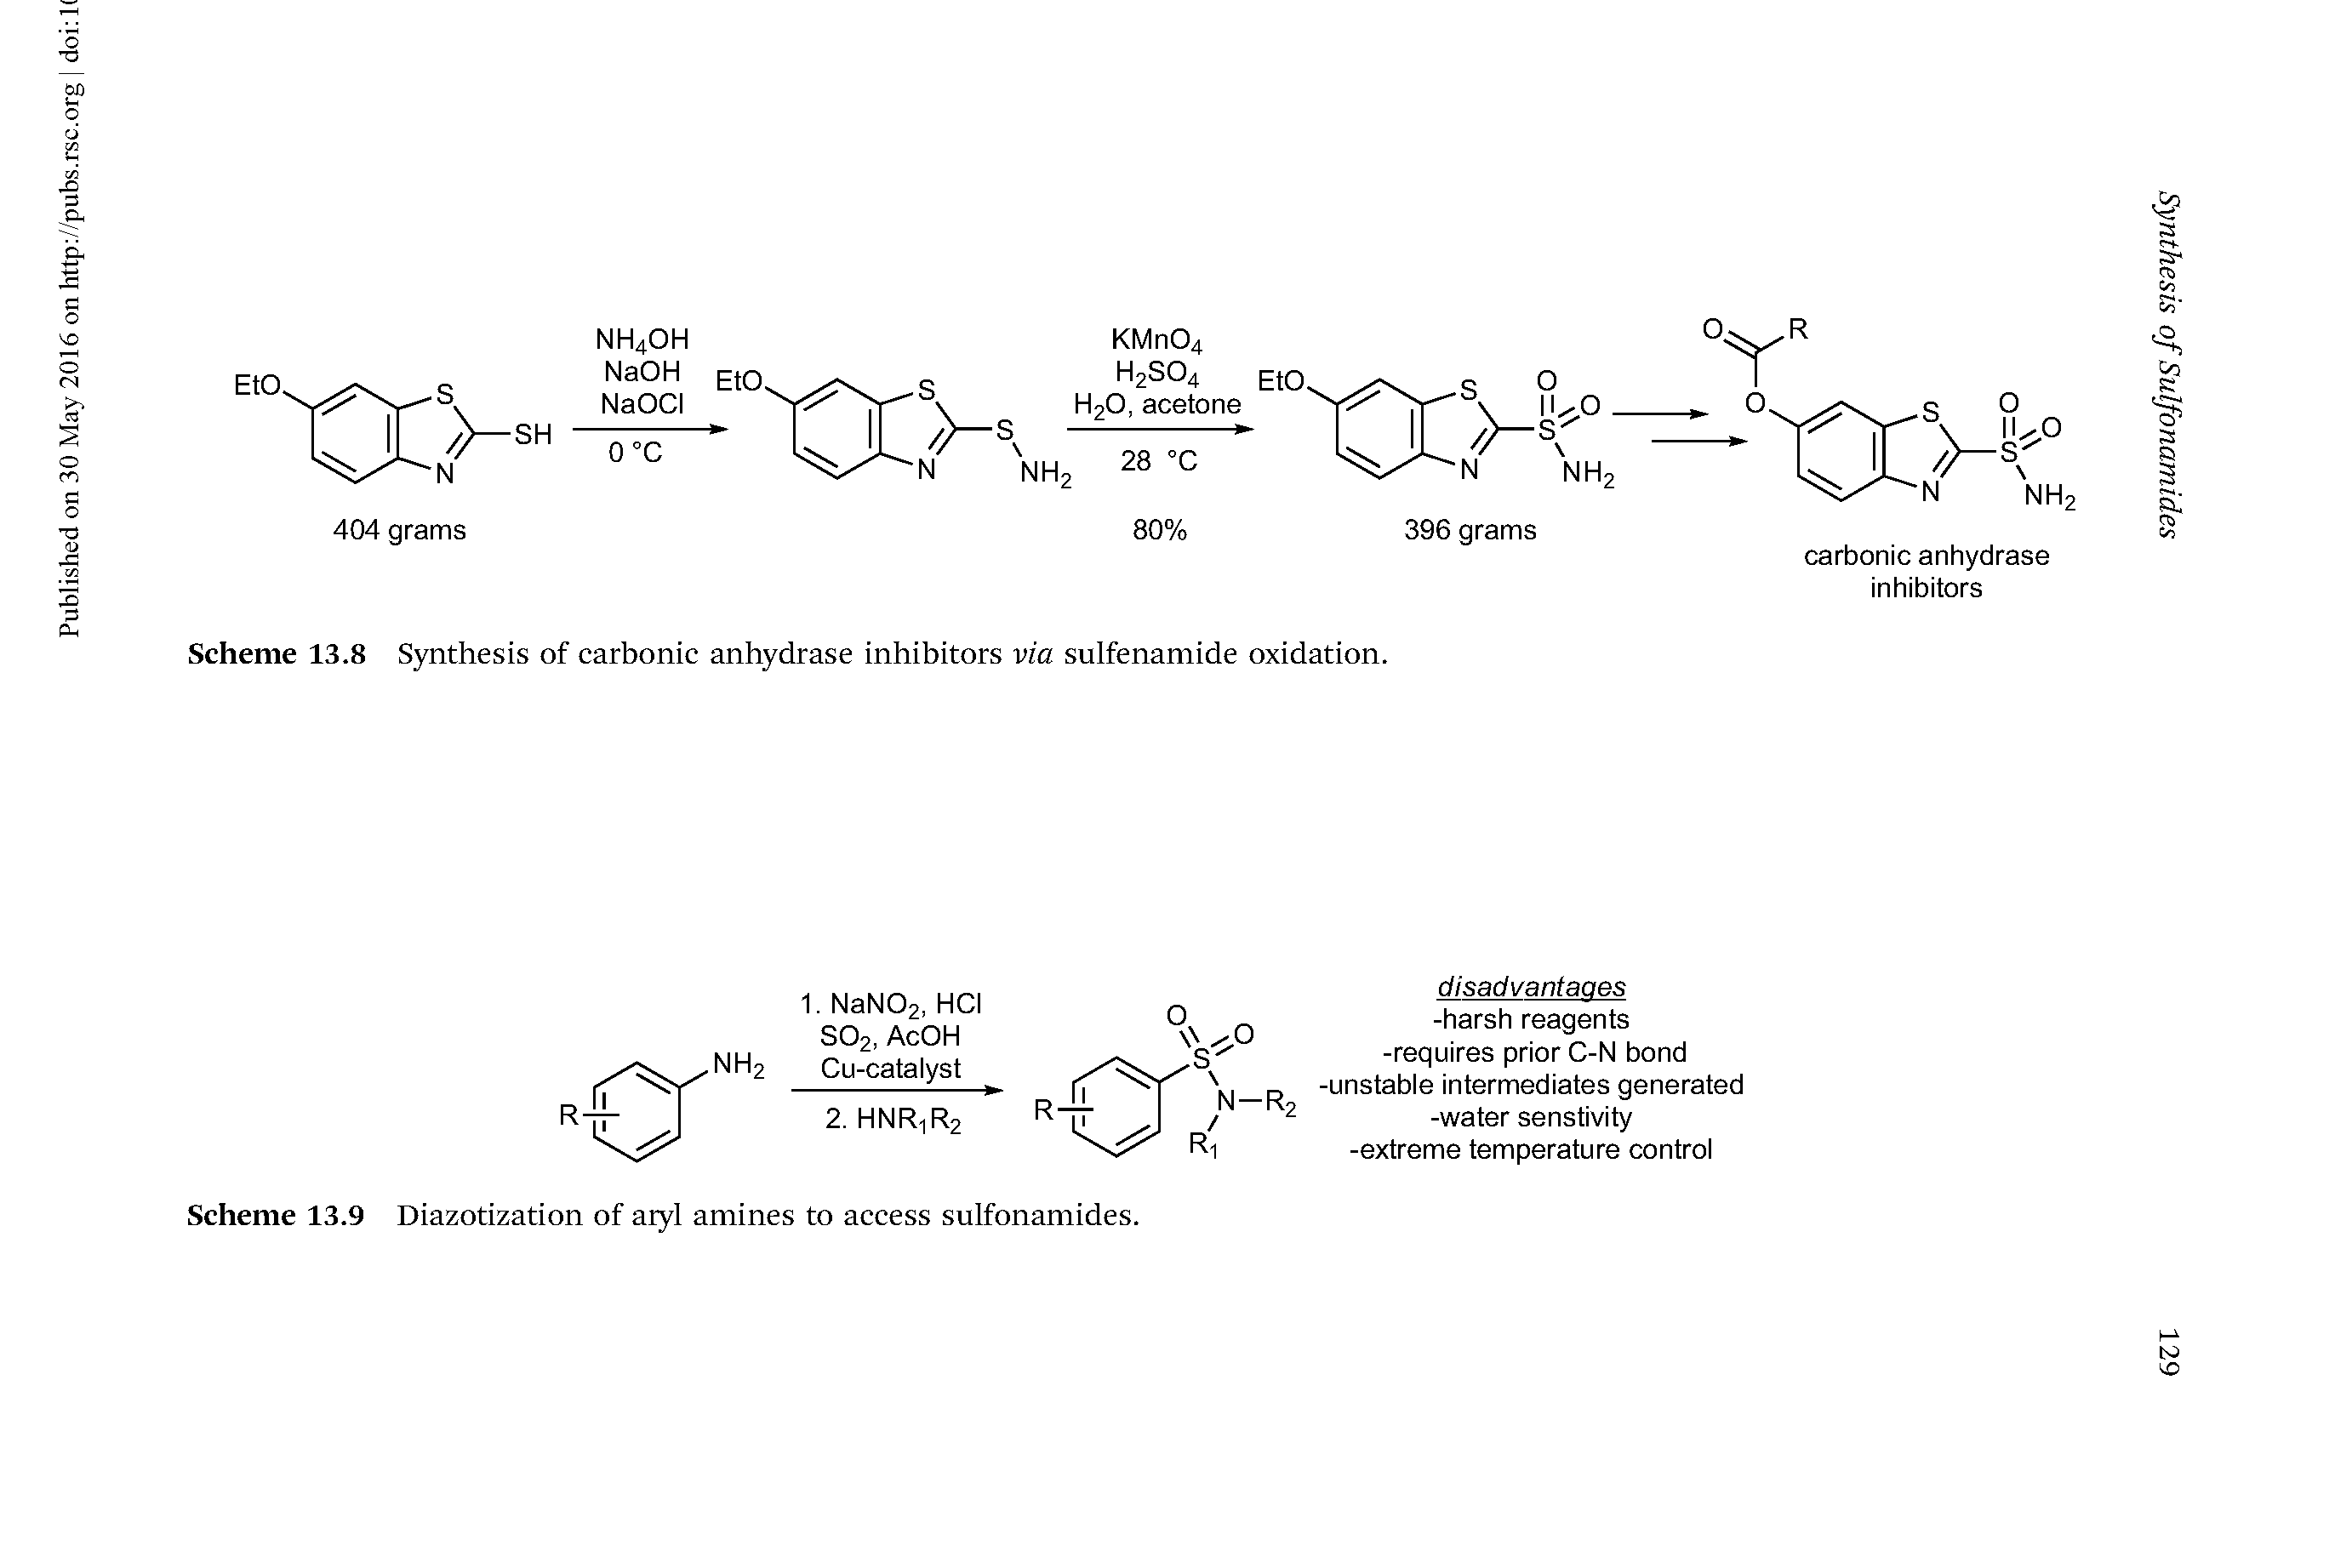 Scheme 13.8 Synthesis of carbonic anhydrase inhibitors via sulfenamide oxidation.